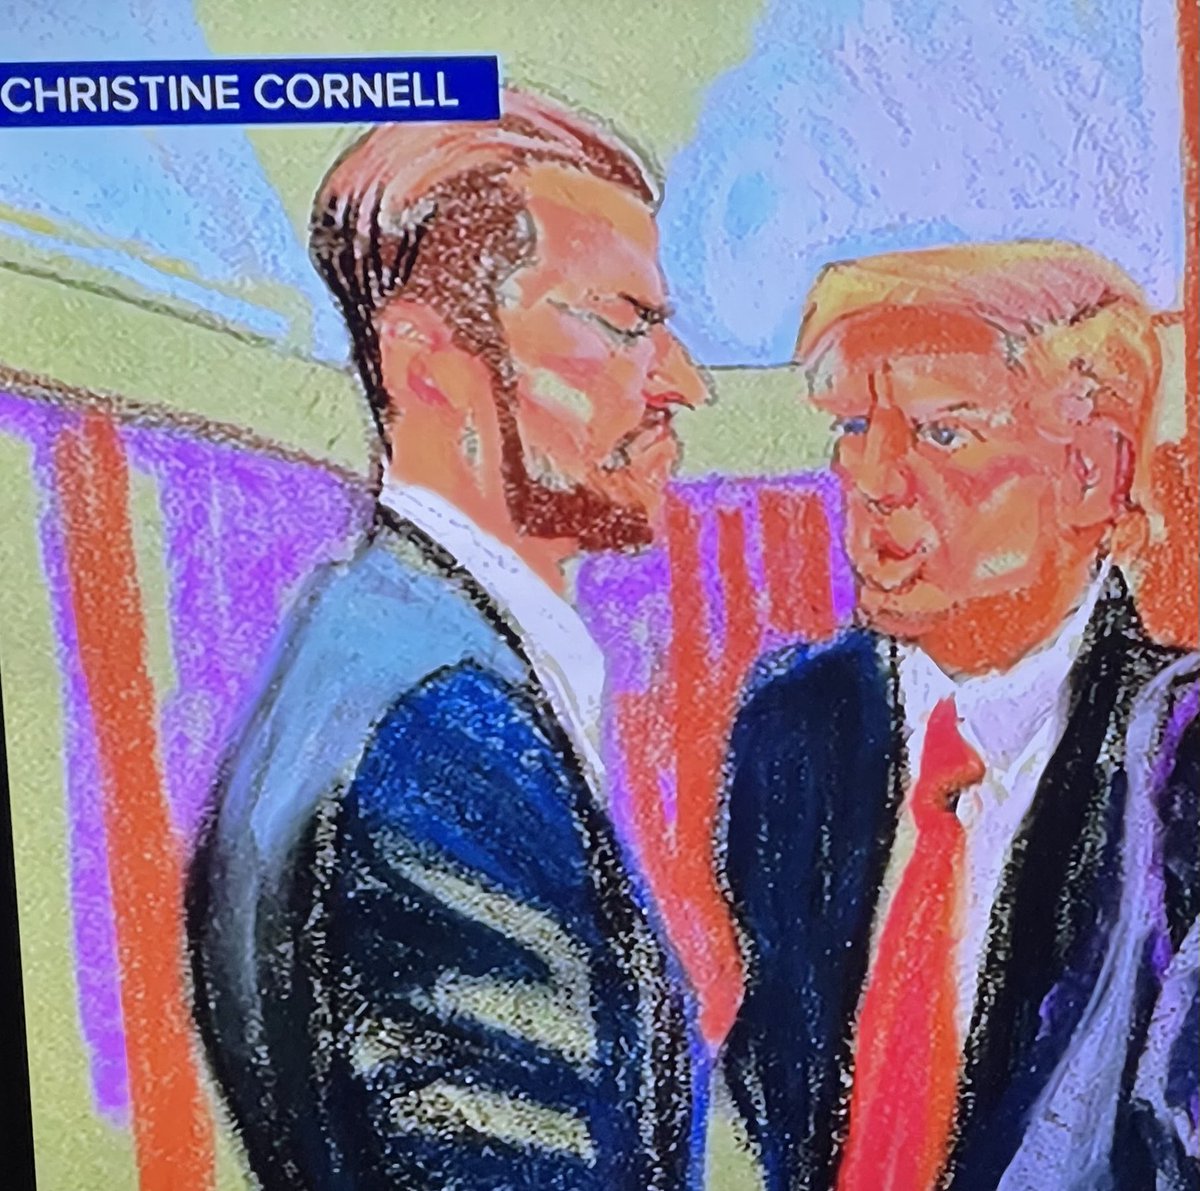 The artist was interviewed by Ari Melber. I wasn’t going to post this, but then she went ahead and called Trump “a good-looking guy” 🤦‍♂️ So, here you go. Can you even tell who’s pictured w/ “the blonde Elvis”? (yes, she called him that, too) 😆😂